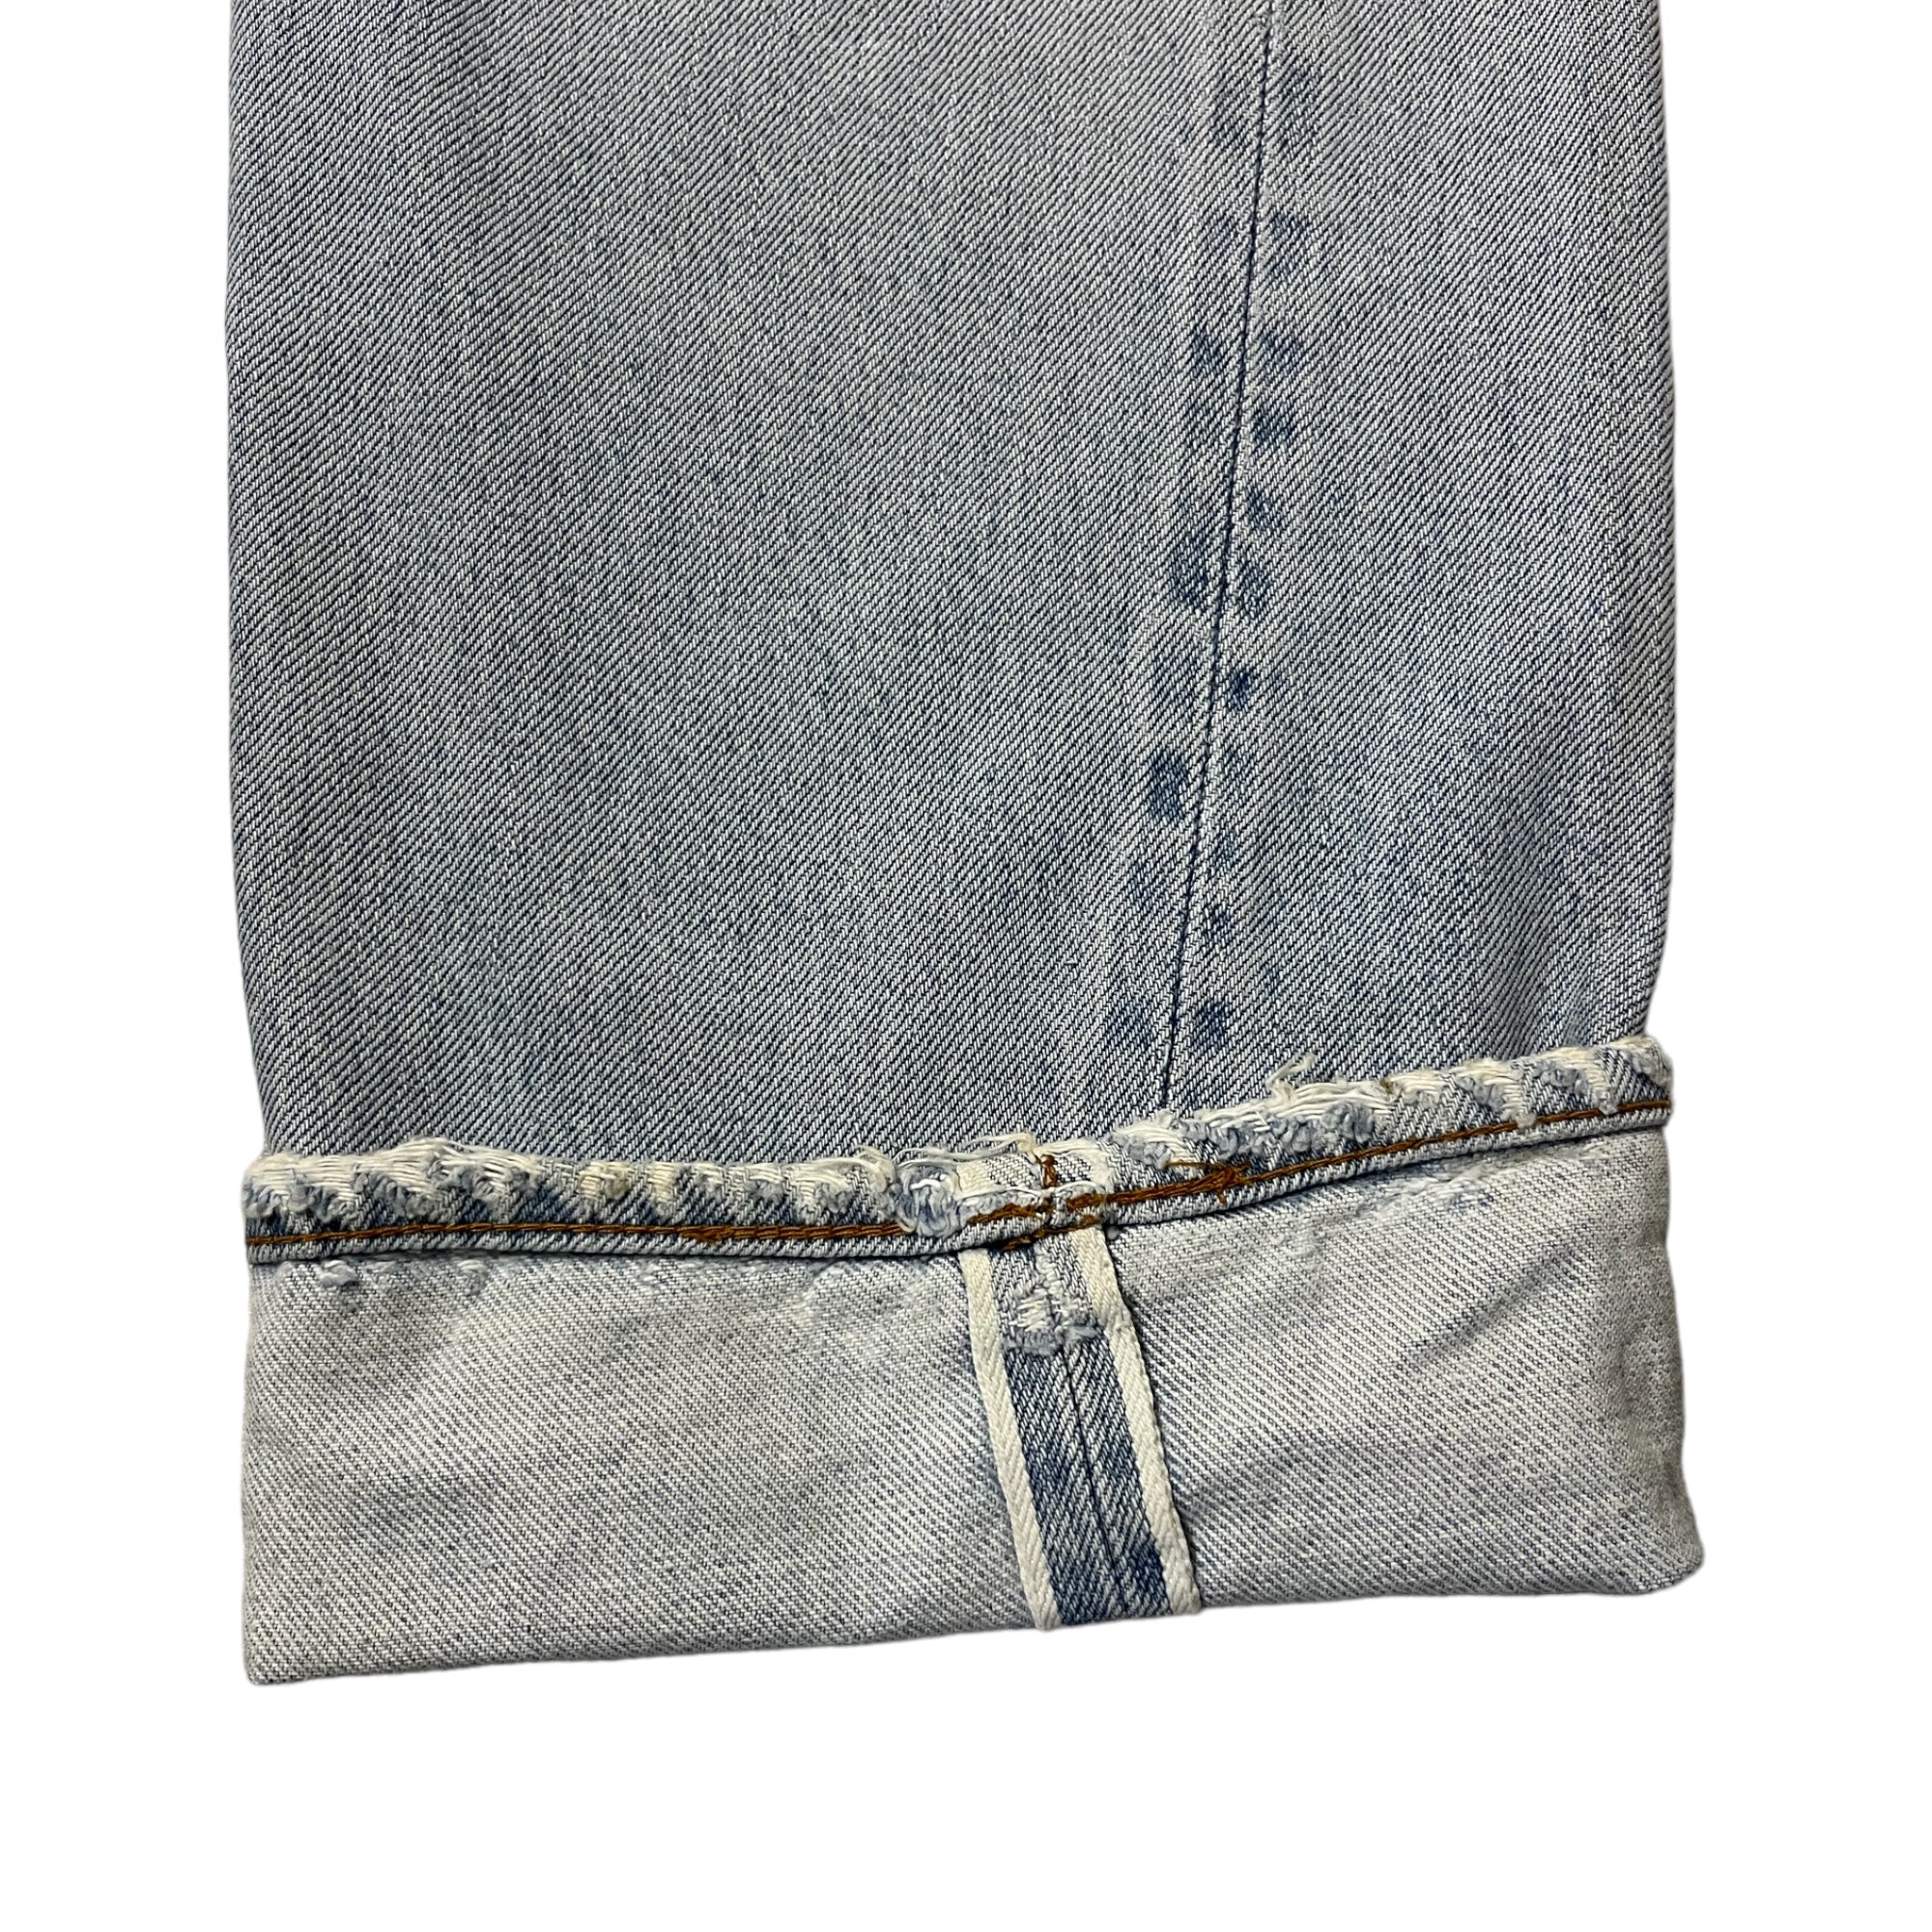 Early 80s Levi’s Redline Selvedge 501 Denim Jeans with Extensive Repairs - Lightwash Blue - 31x31